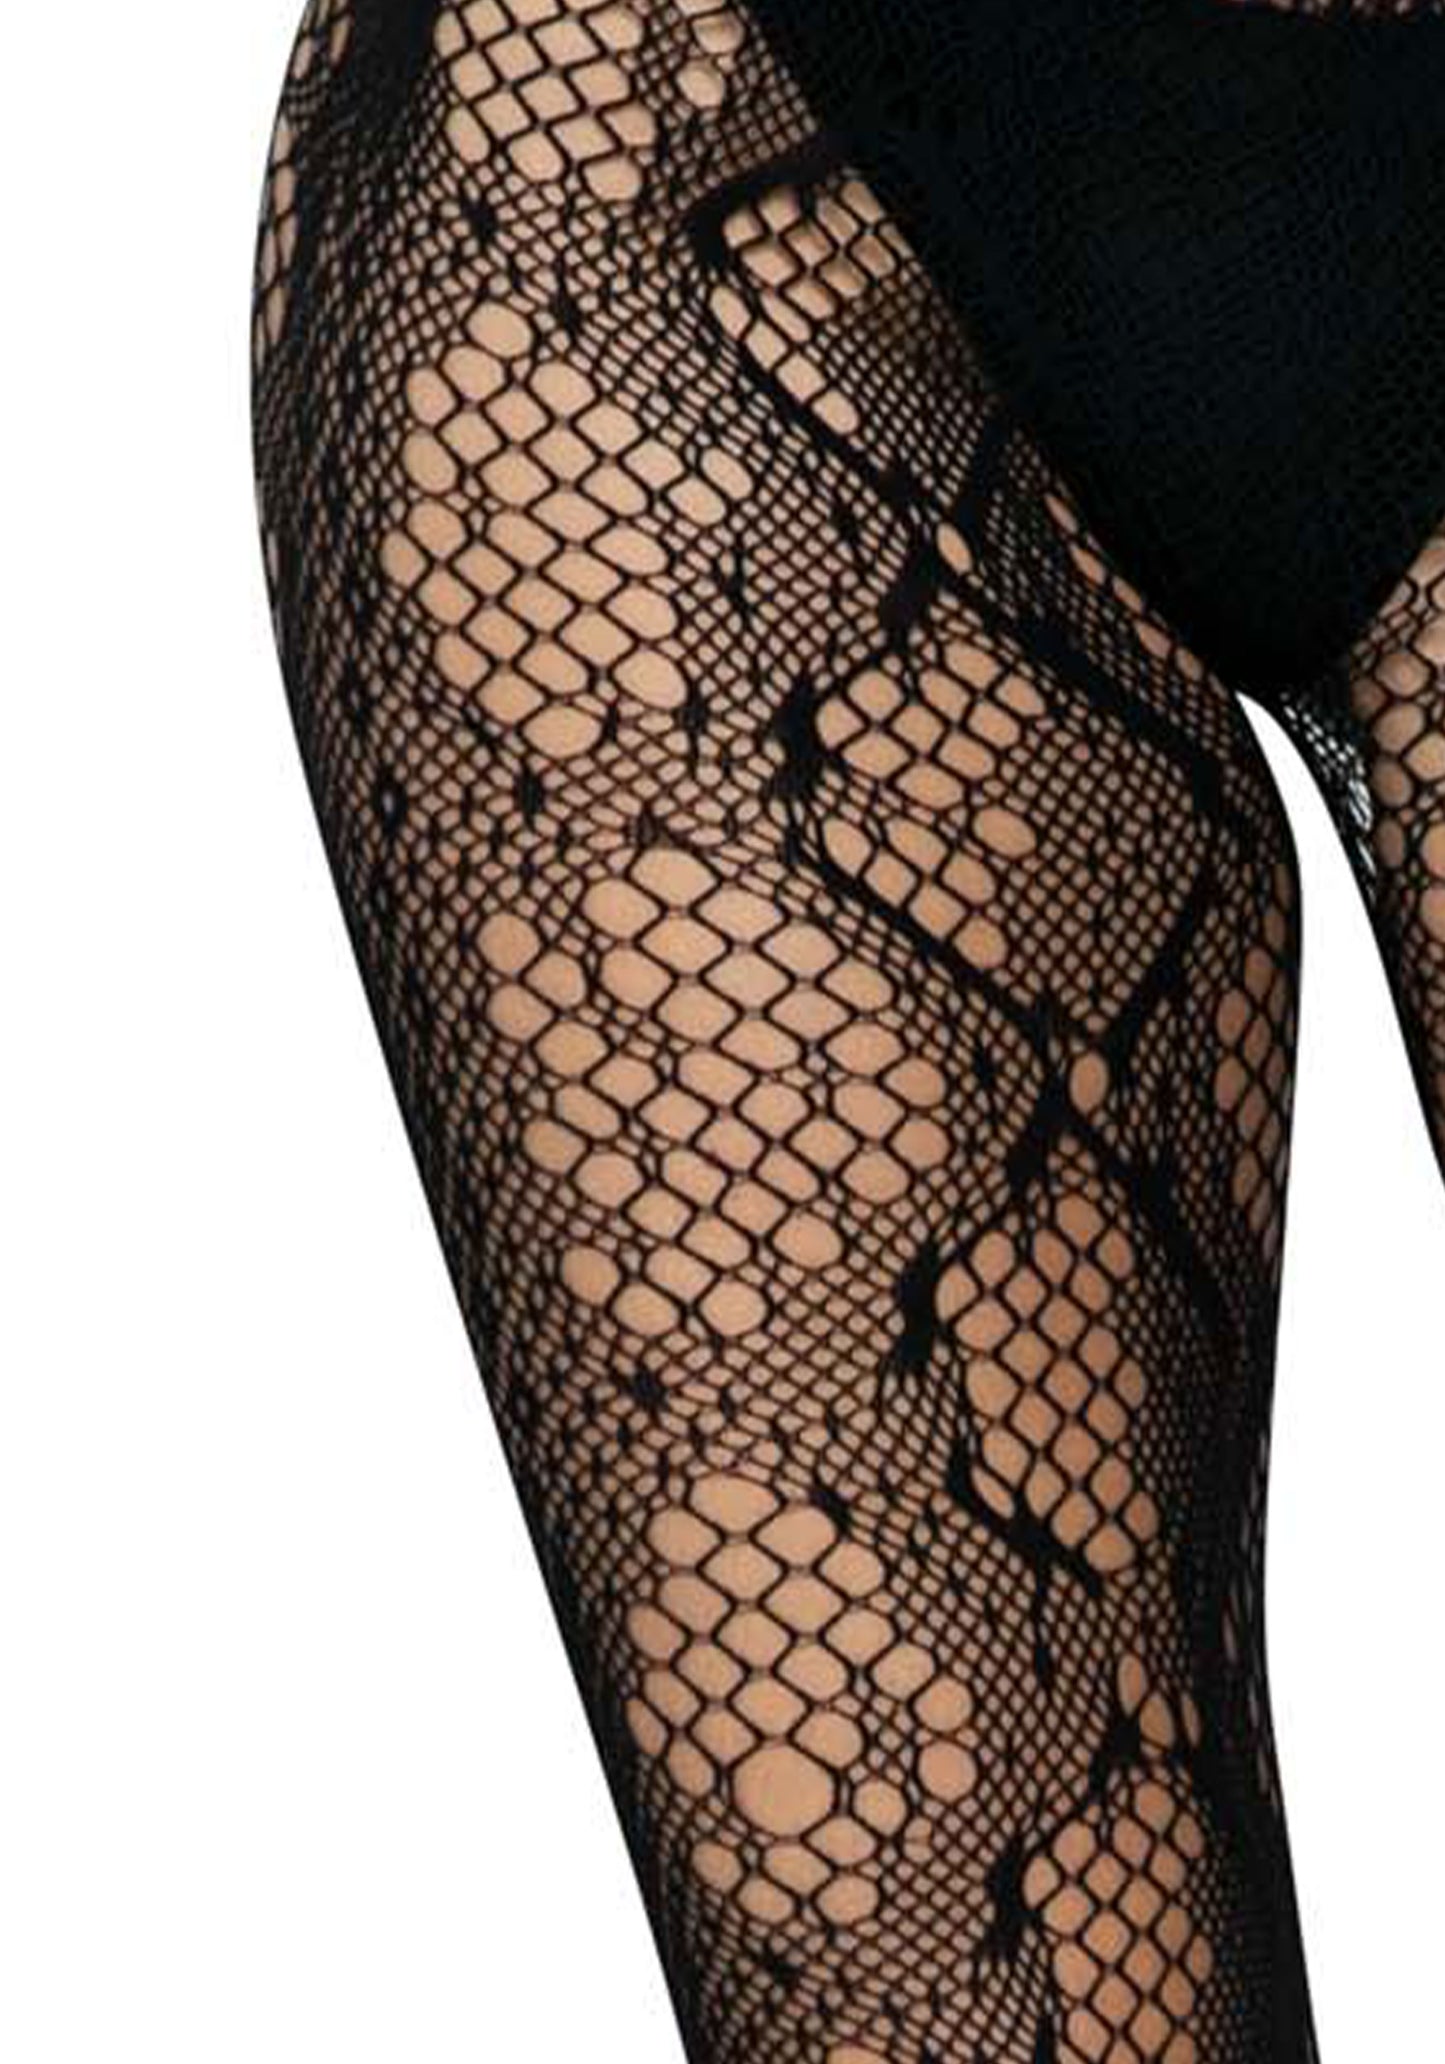 Leg Avenue 9719 Python Net Tights - Black fishnet lace tights with woven snake skin print style pattern.